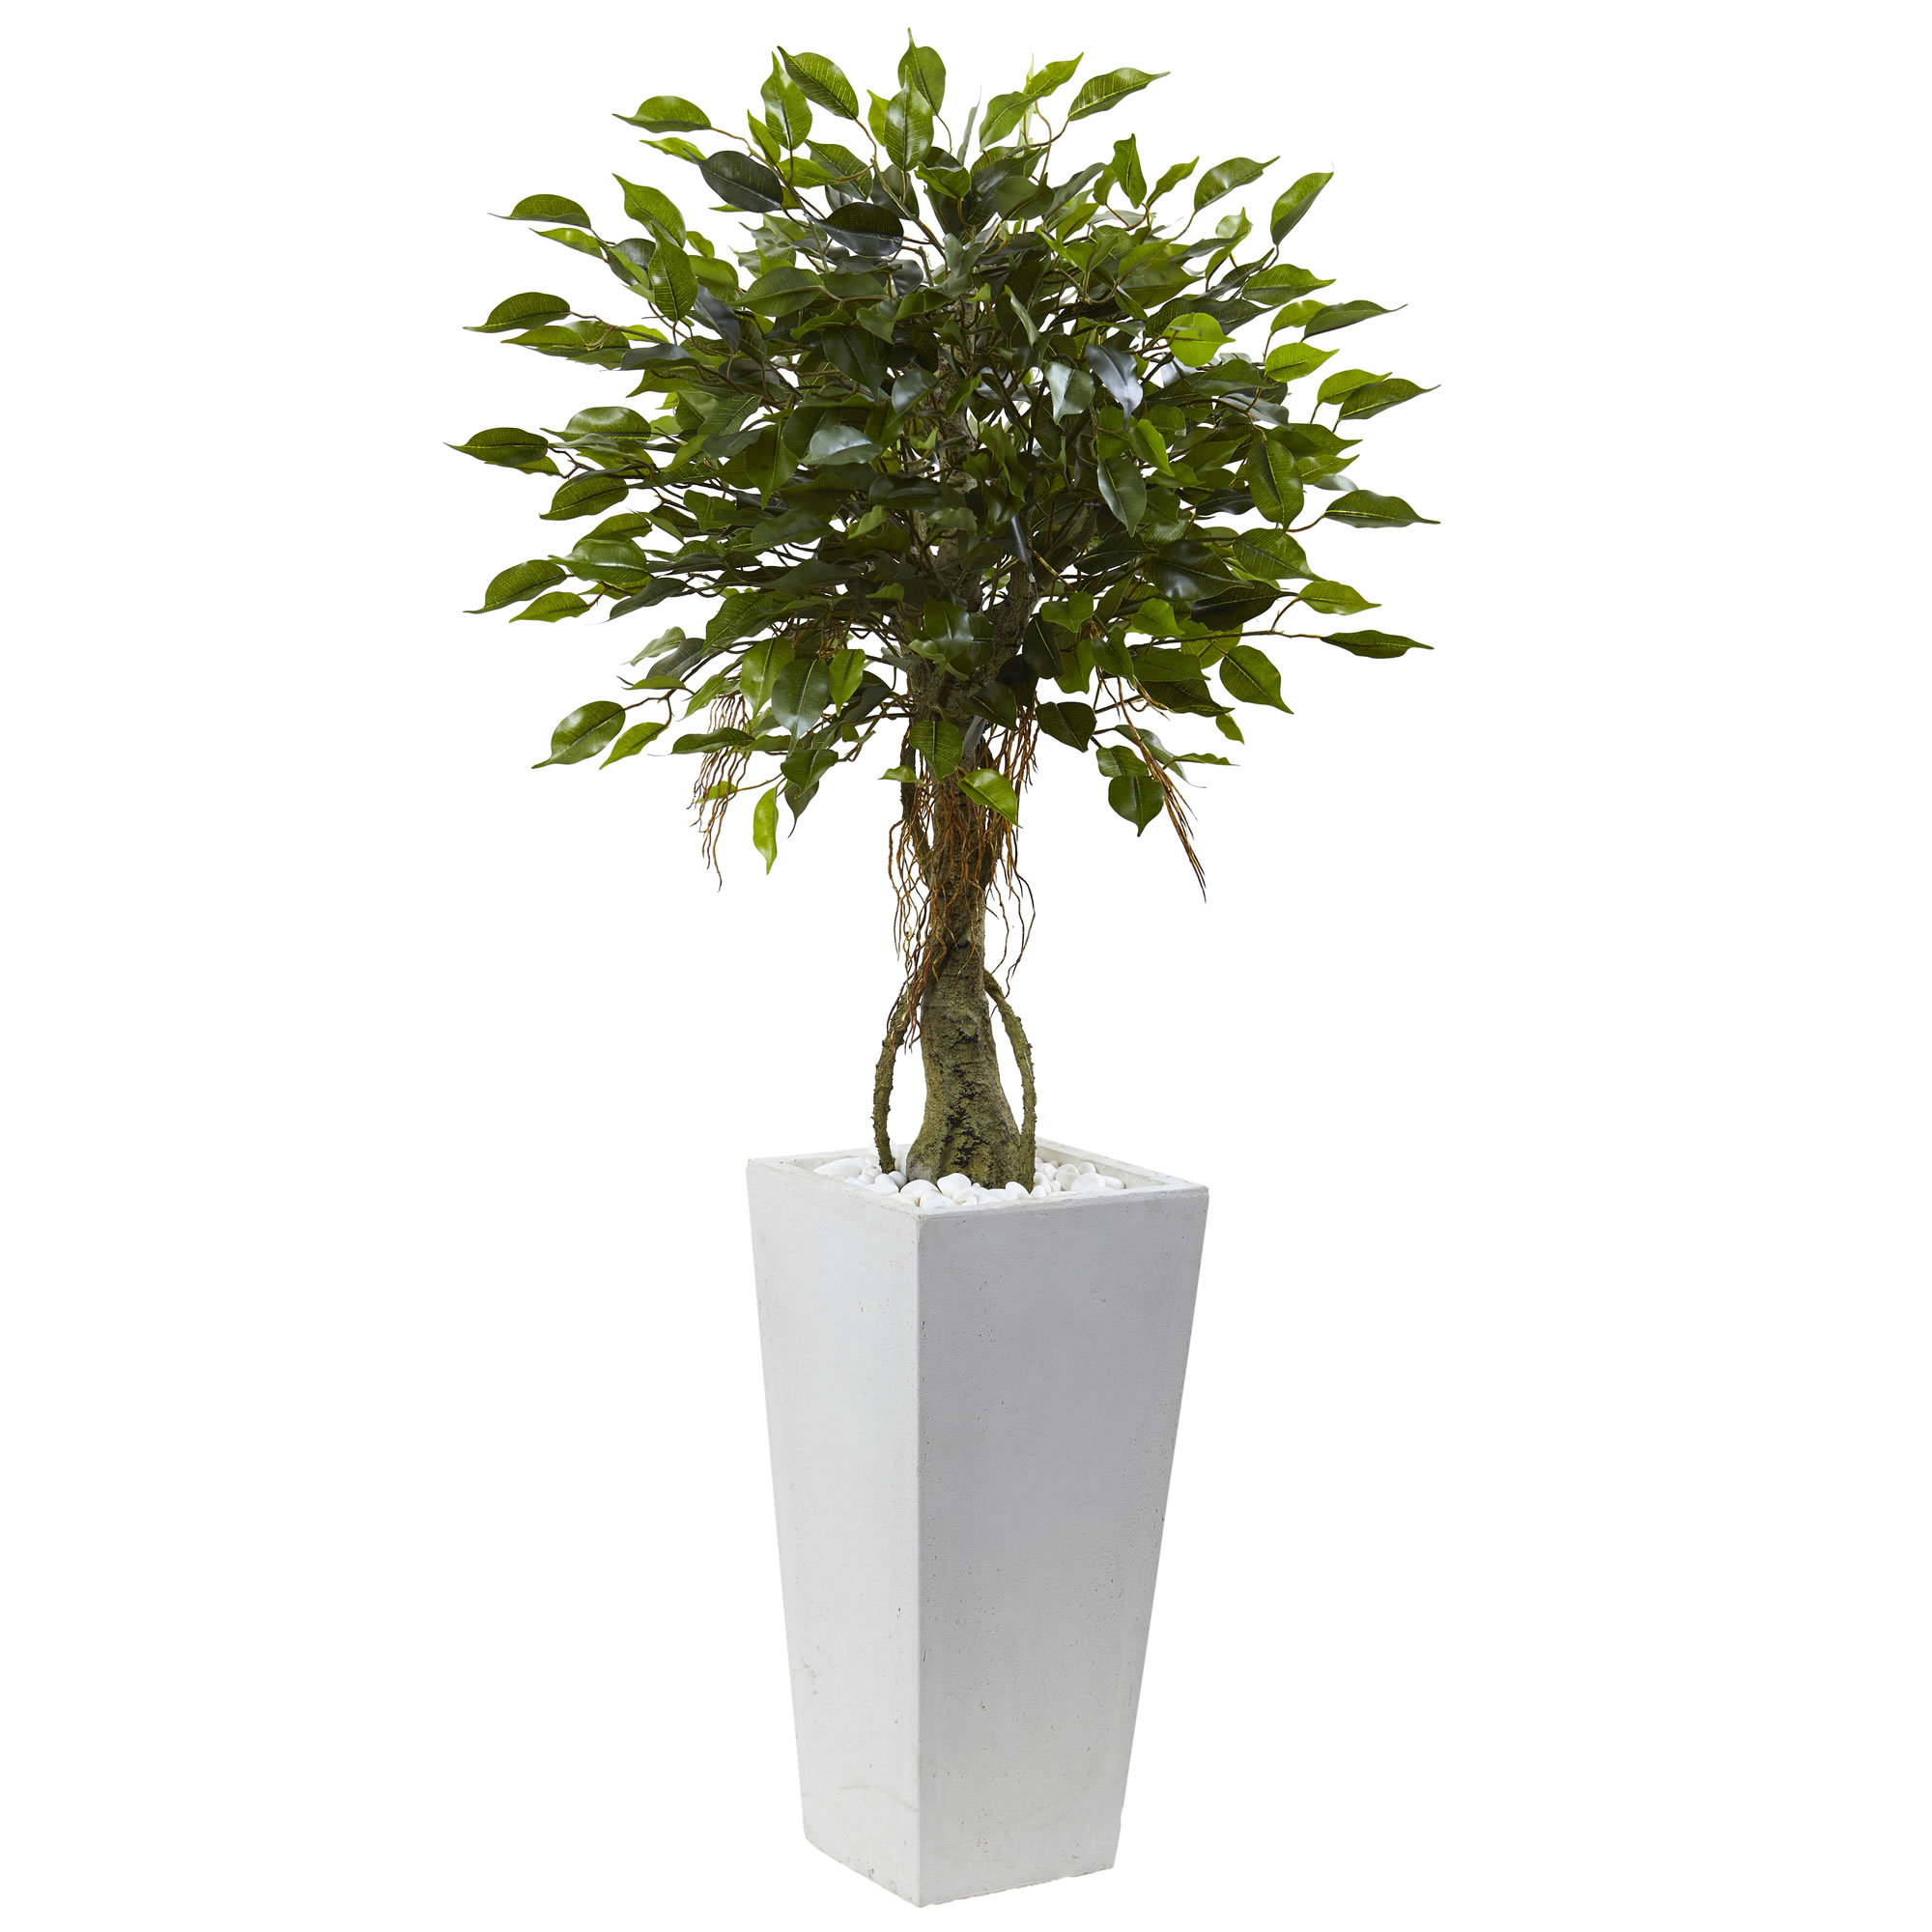 52 Inch Ficus Tree In White Planter: Limited Uv Protection